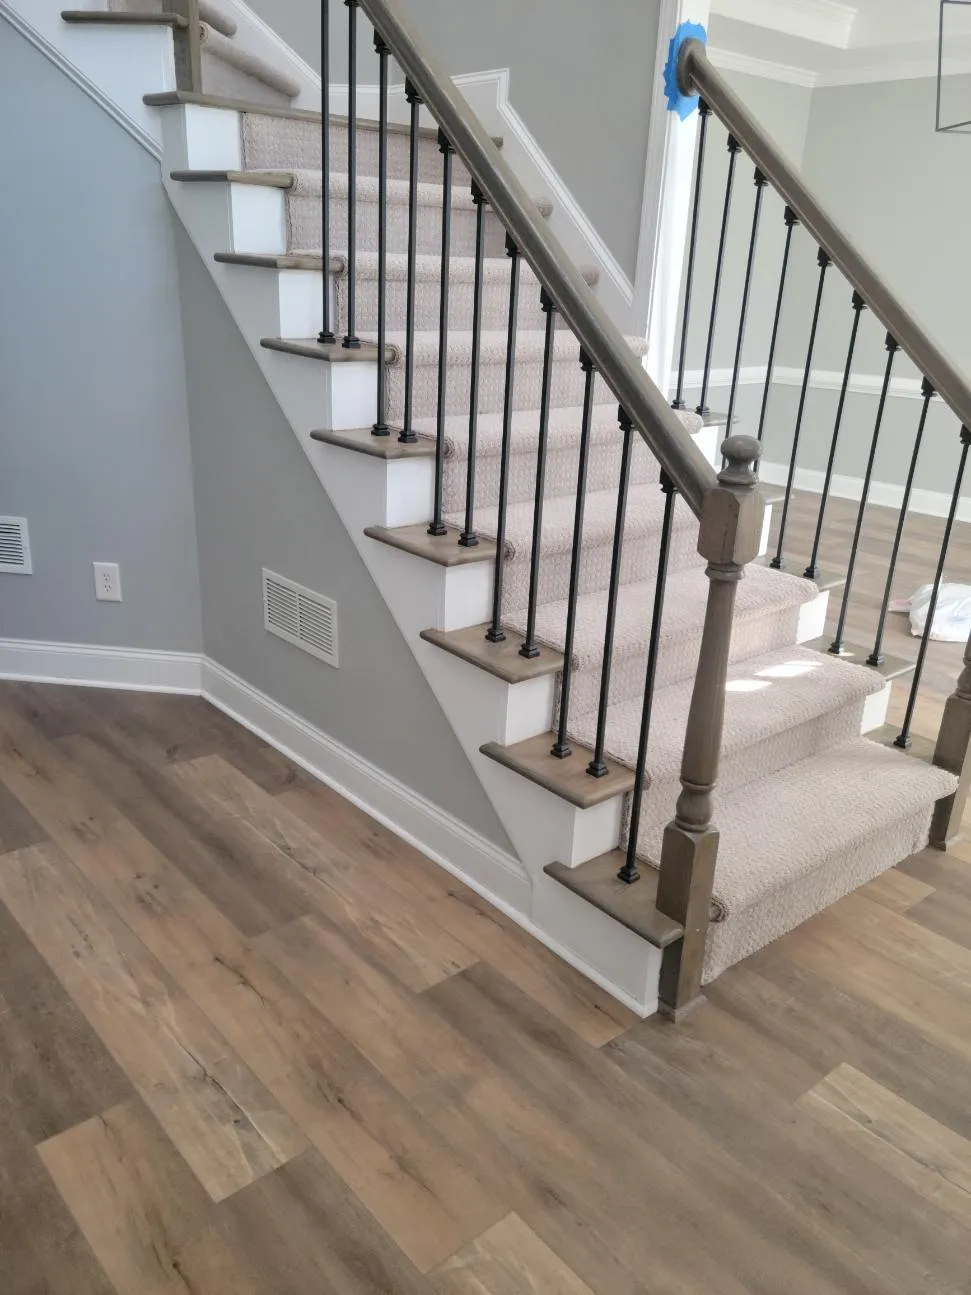 New Vinyl flooring with staircase